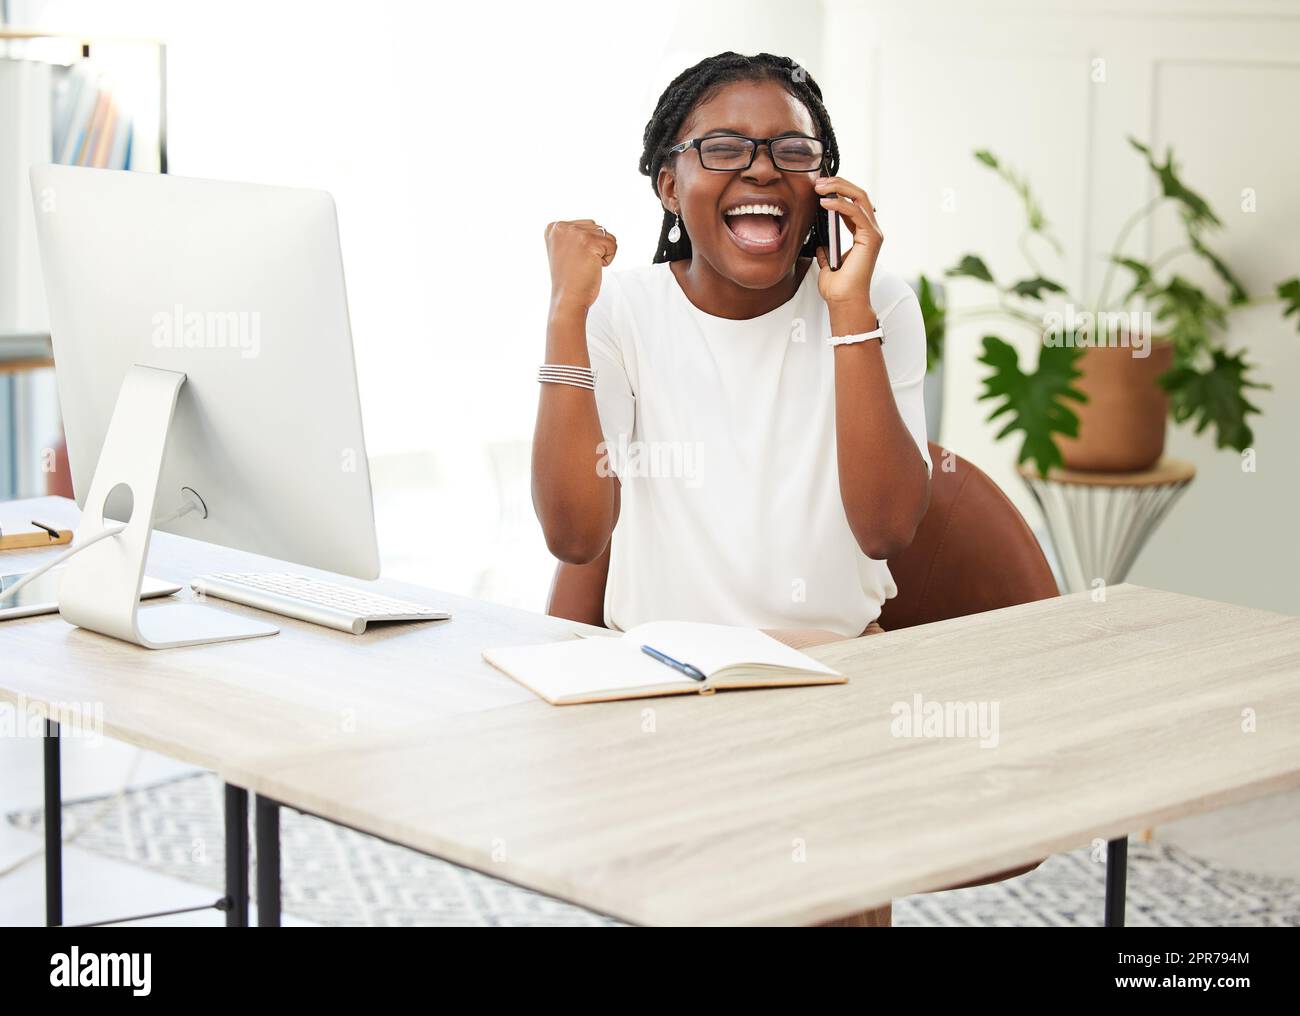 I cant believe I did it. Shot of a young businesswoman cheering while on a call at work. Stock Photo